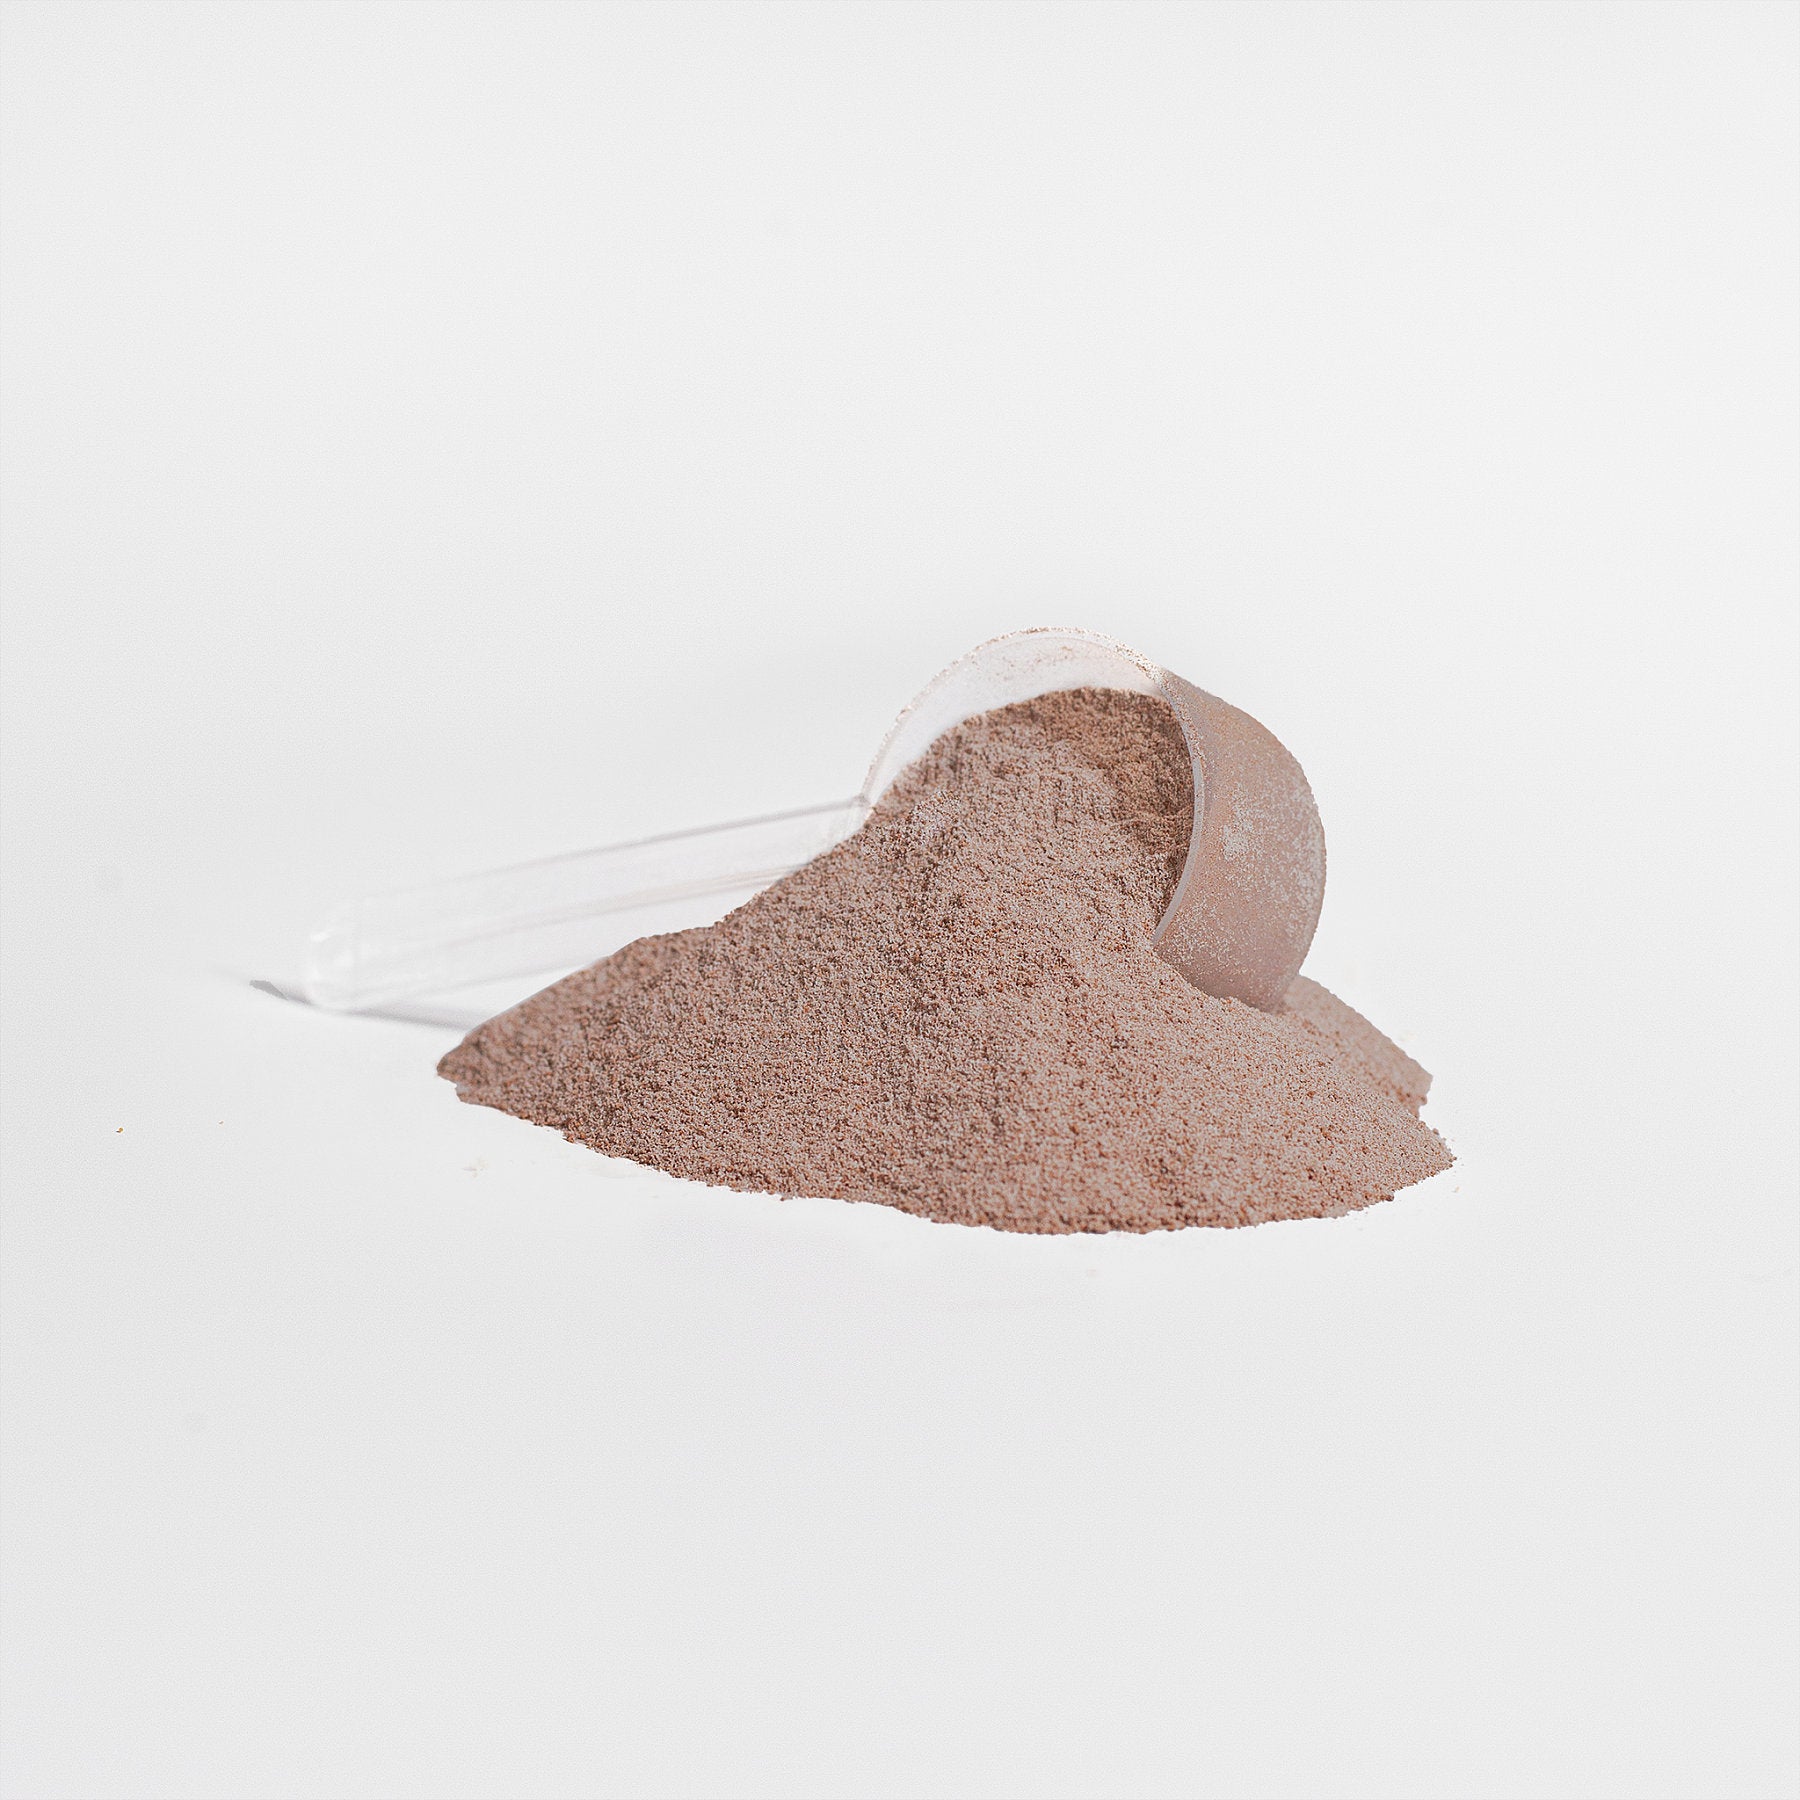 Muscle-Boost Whey Protein in Chocolate Flavor